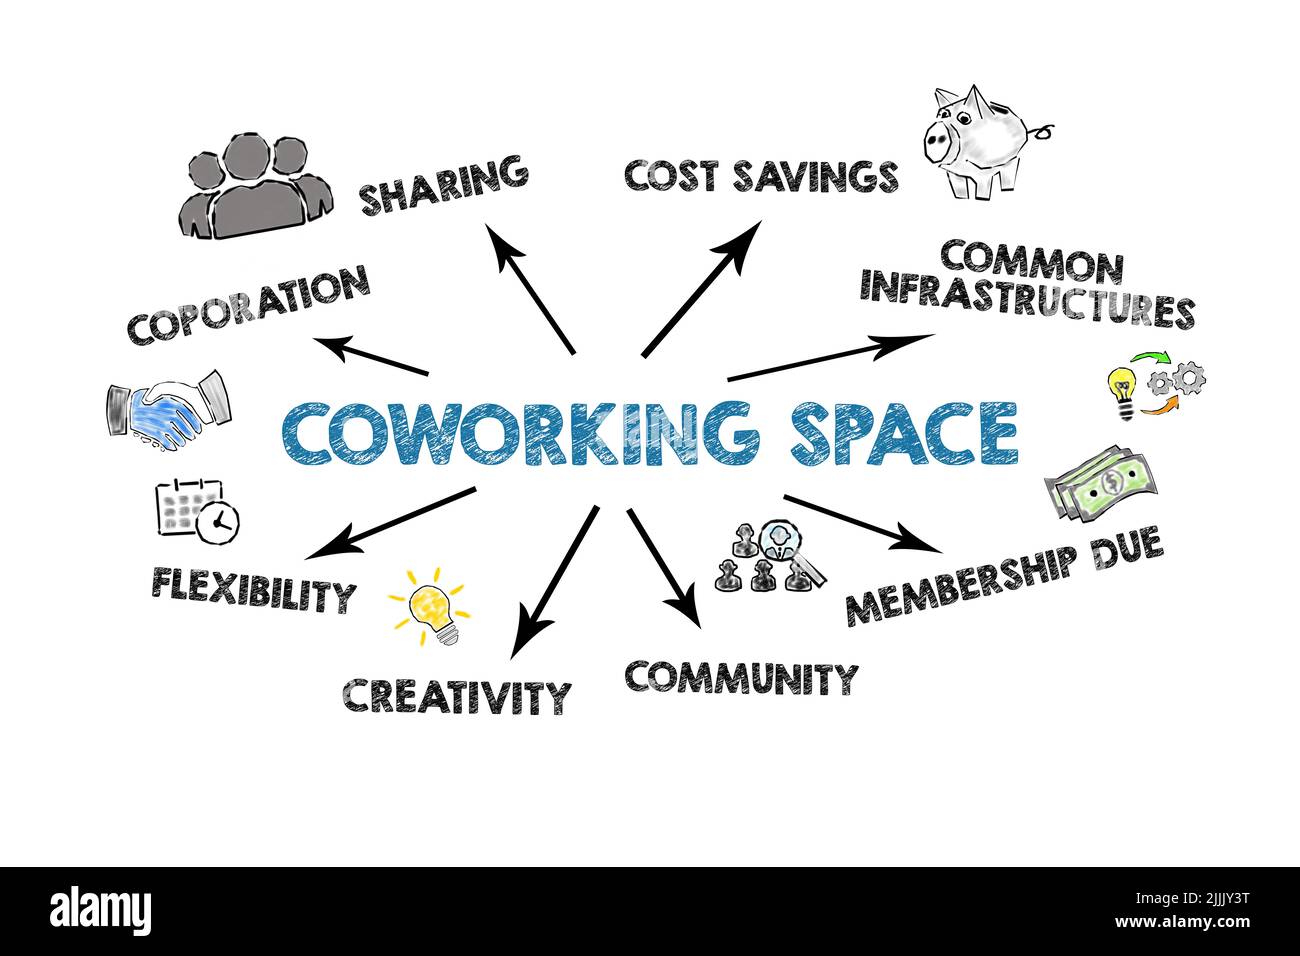 Coworking space. Illustration with keywords and icons on a white background. Stock Photo